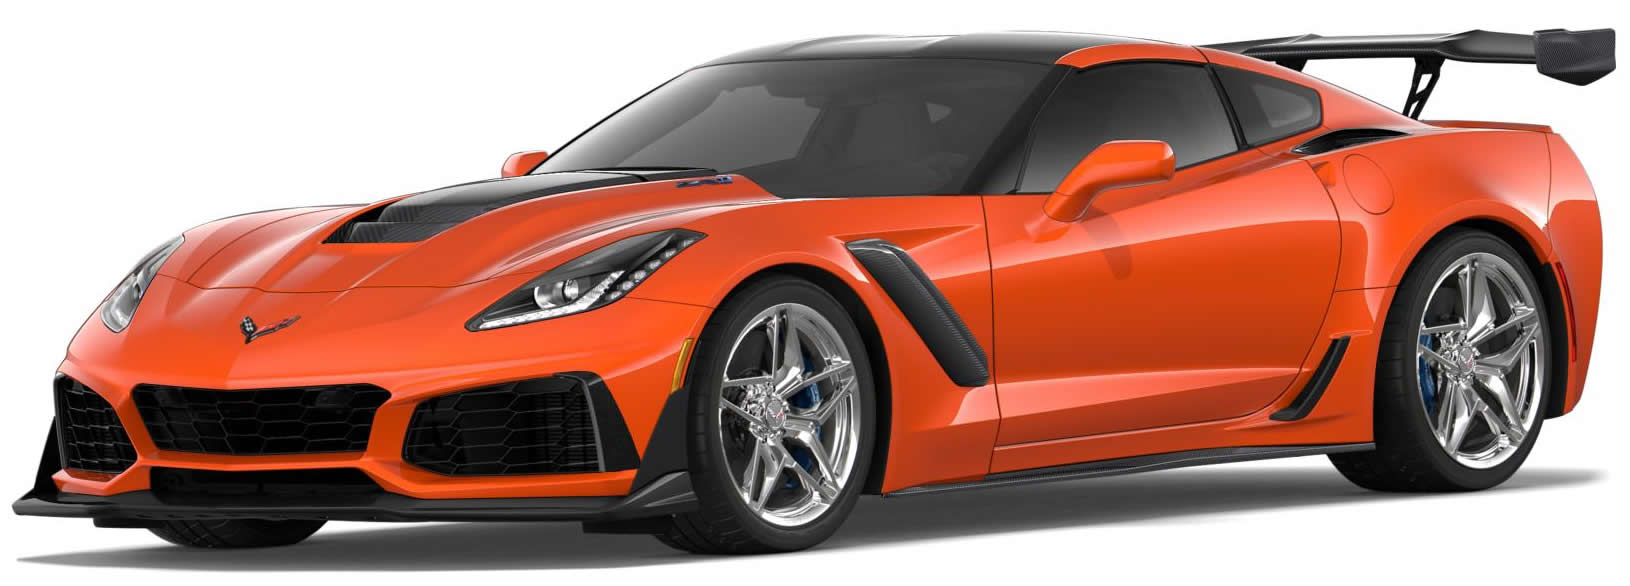 2019 Corvette ZR1 Coupe in Sebring Orange Metallic with the ZTK Track Performance Package and Chrome Wheels